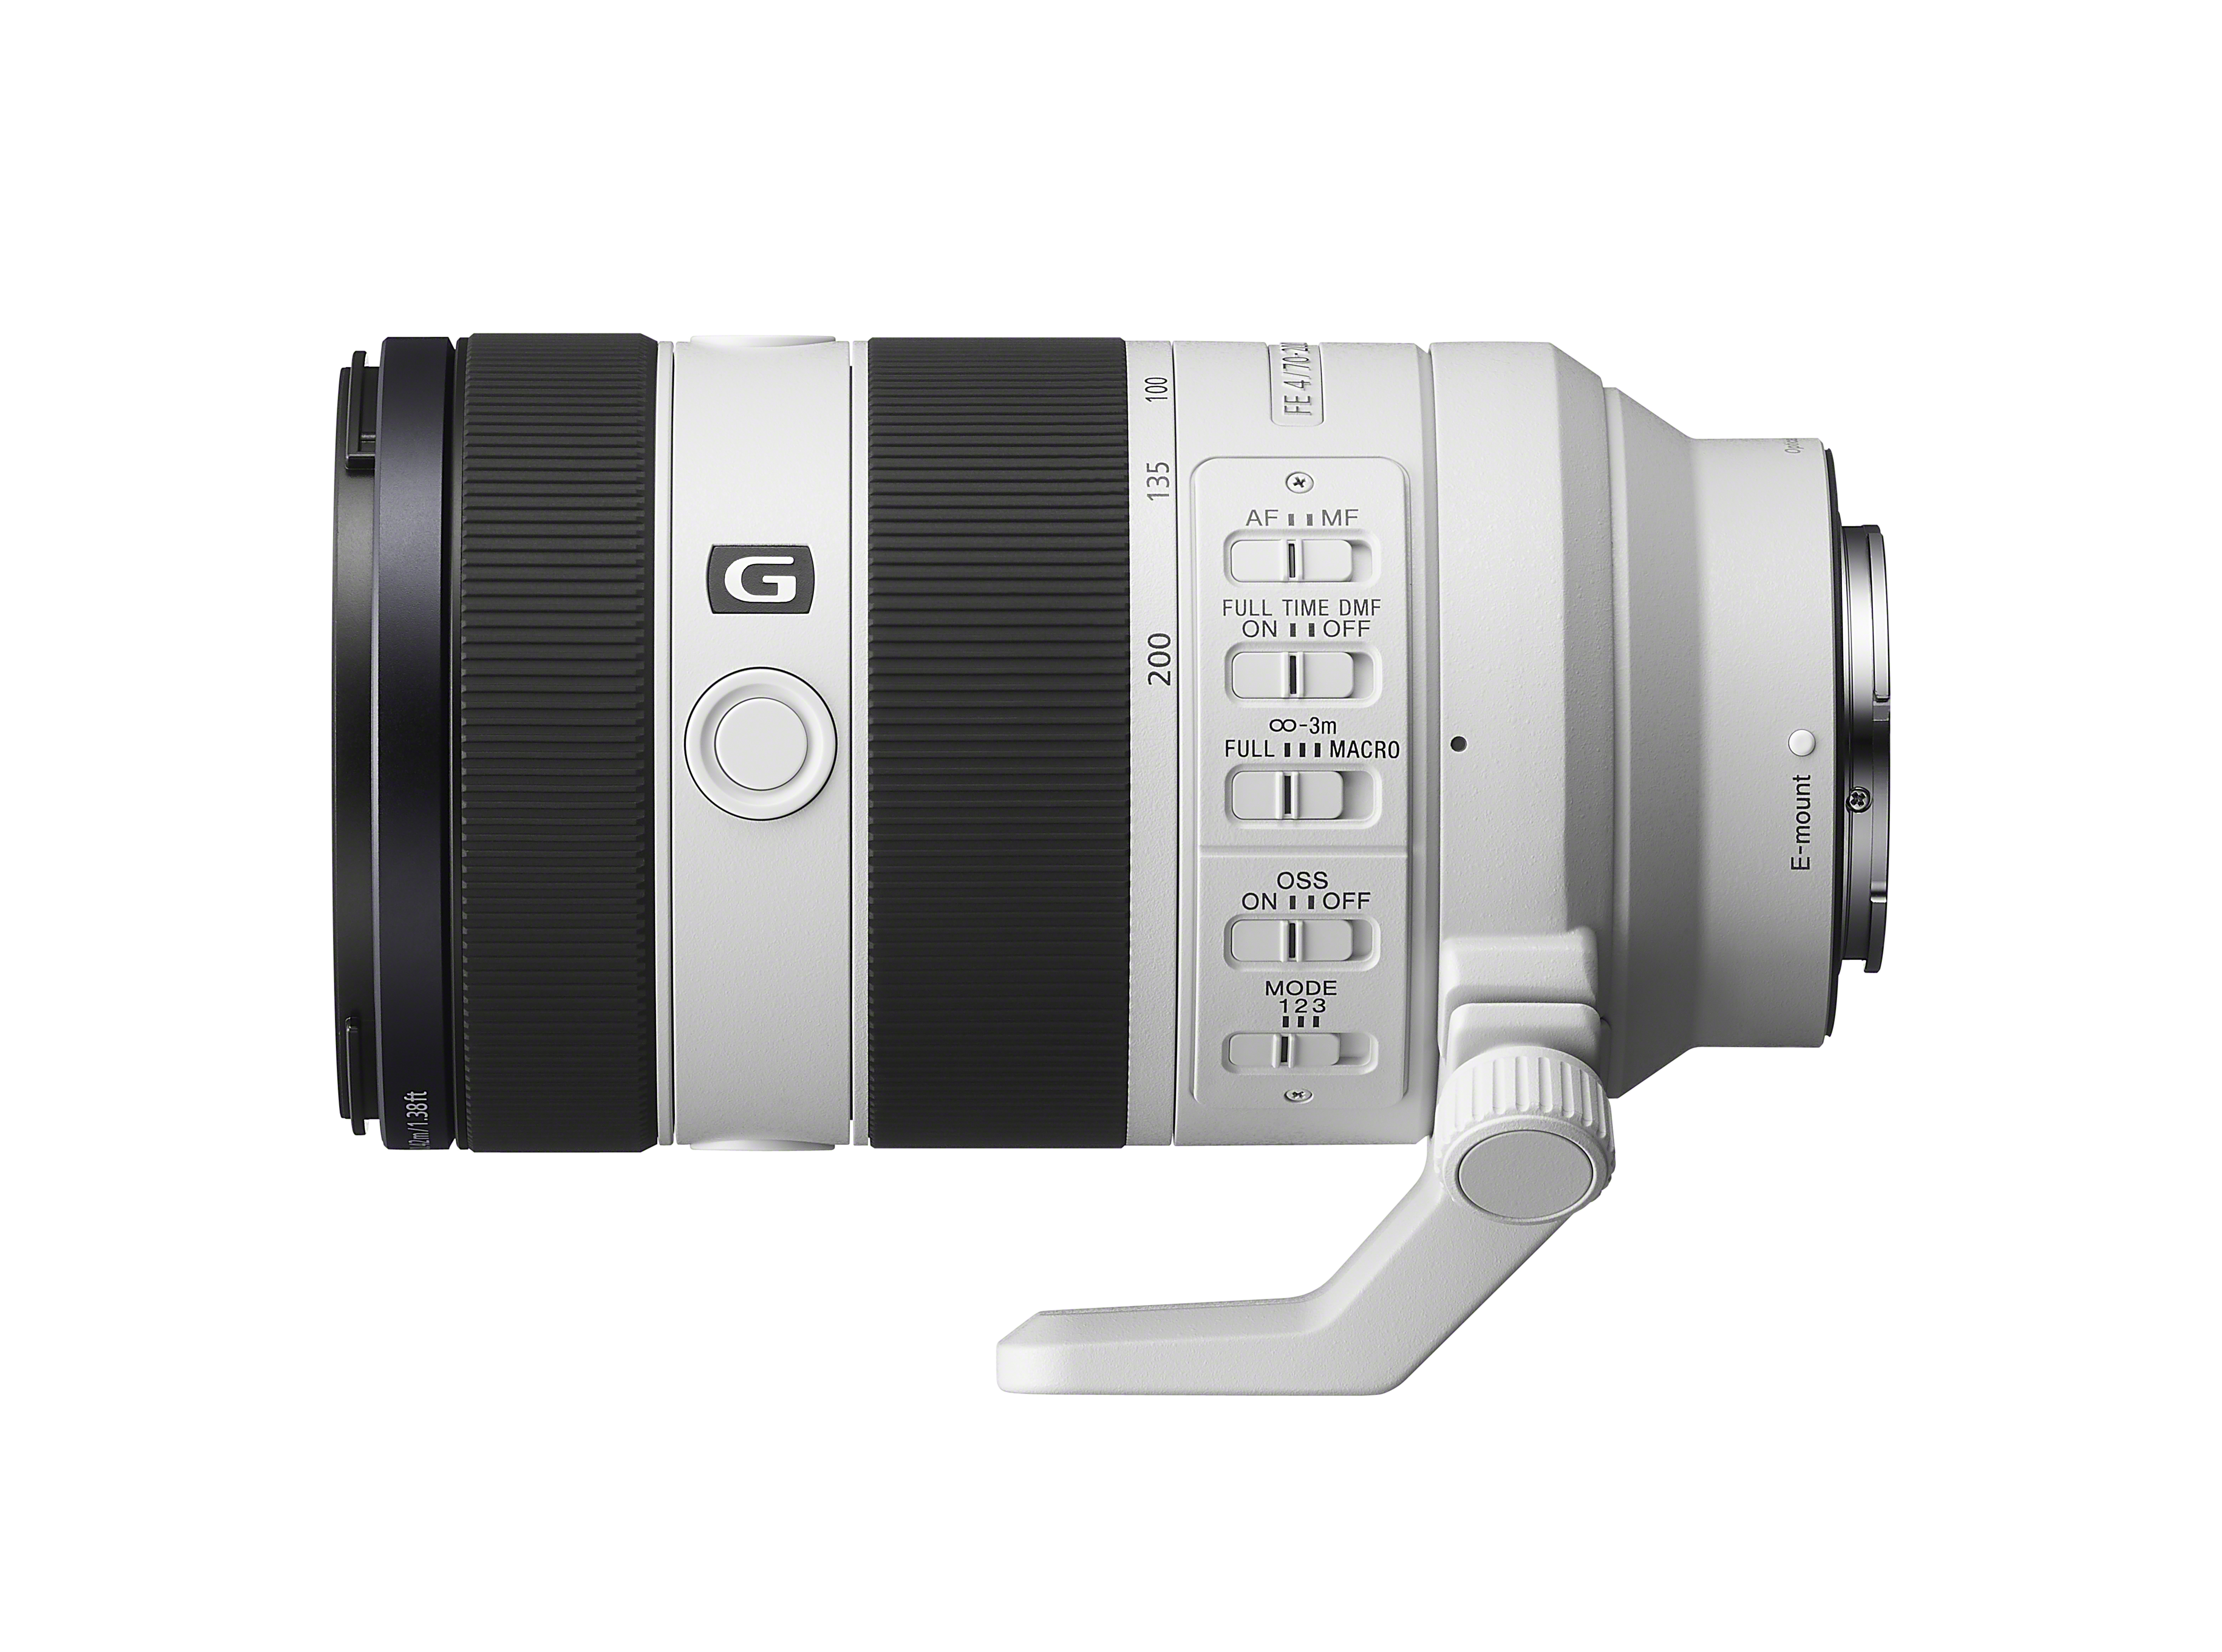 Sony 70-200mm f/2.8 G Alpha A-Mount Telephoto Zoom Lens